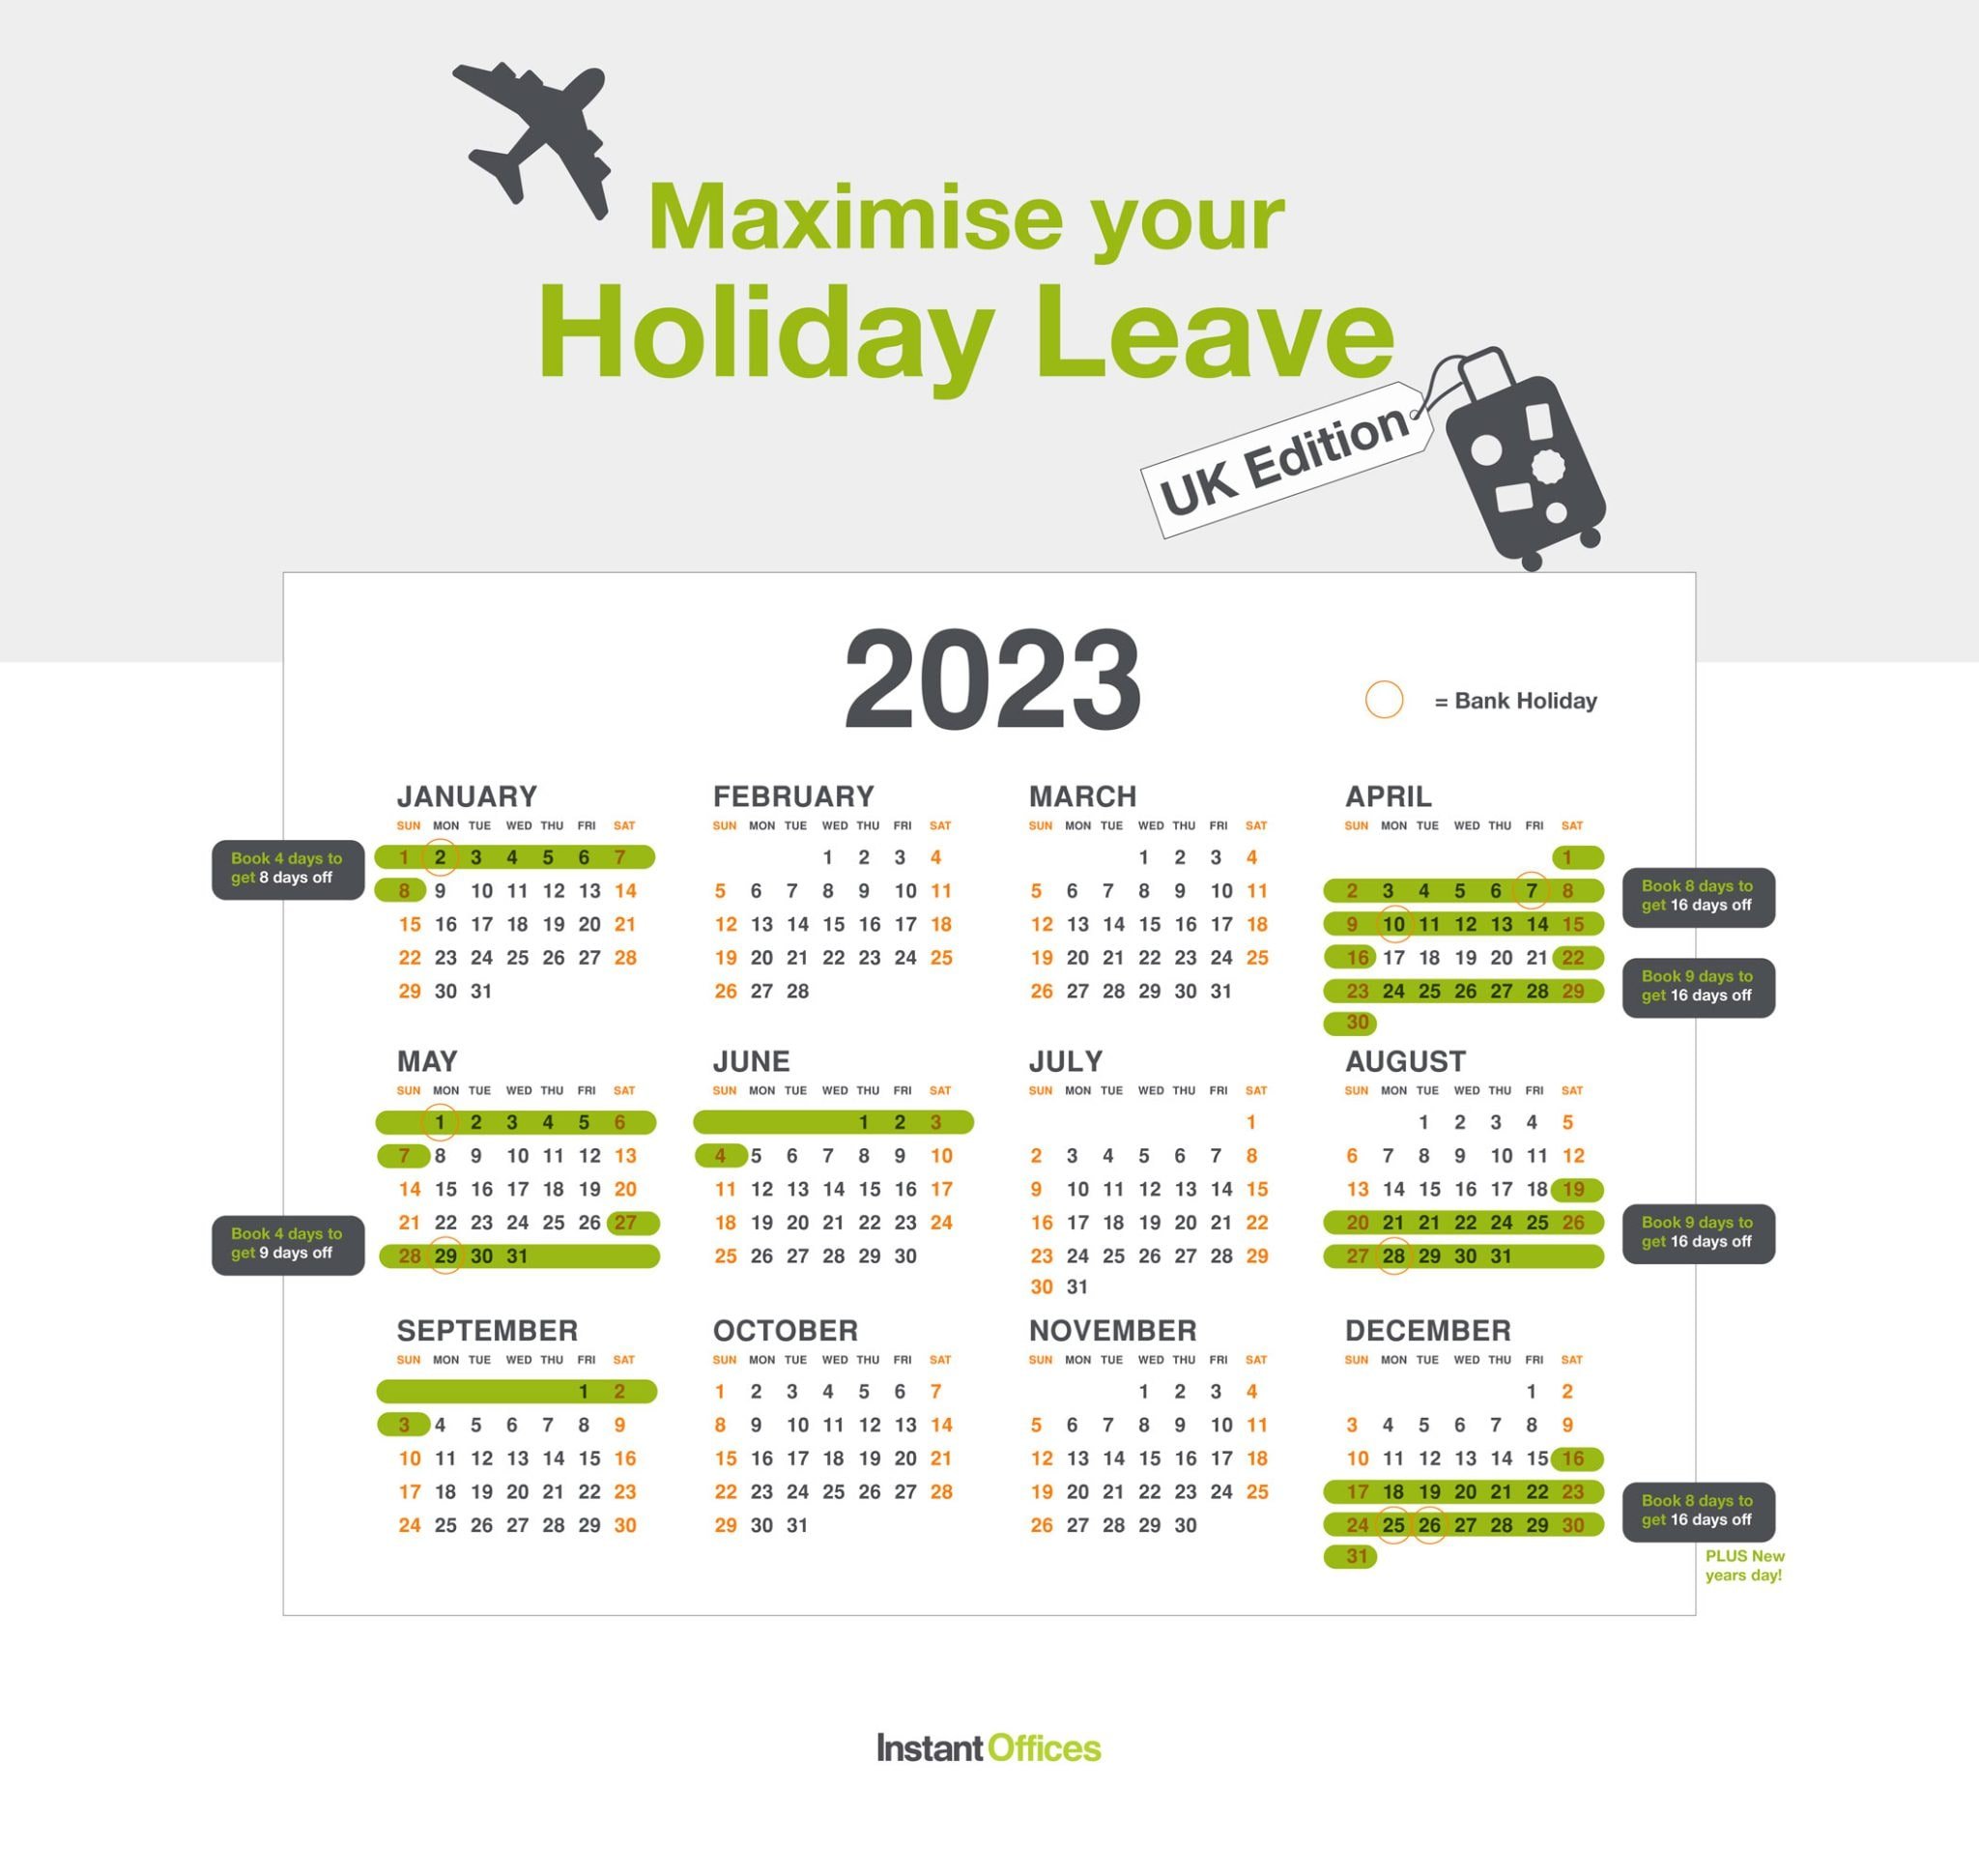 How to maximise annual leave in the UK in 2023 Instant Offices